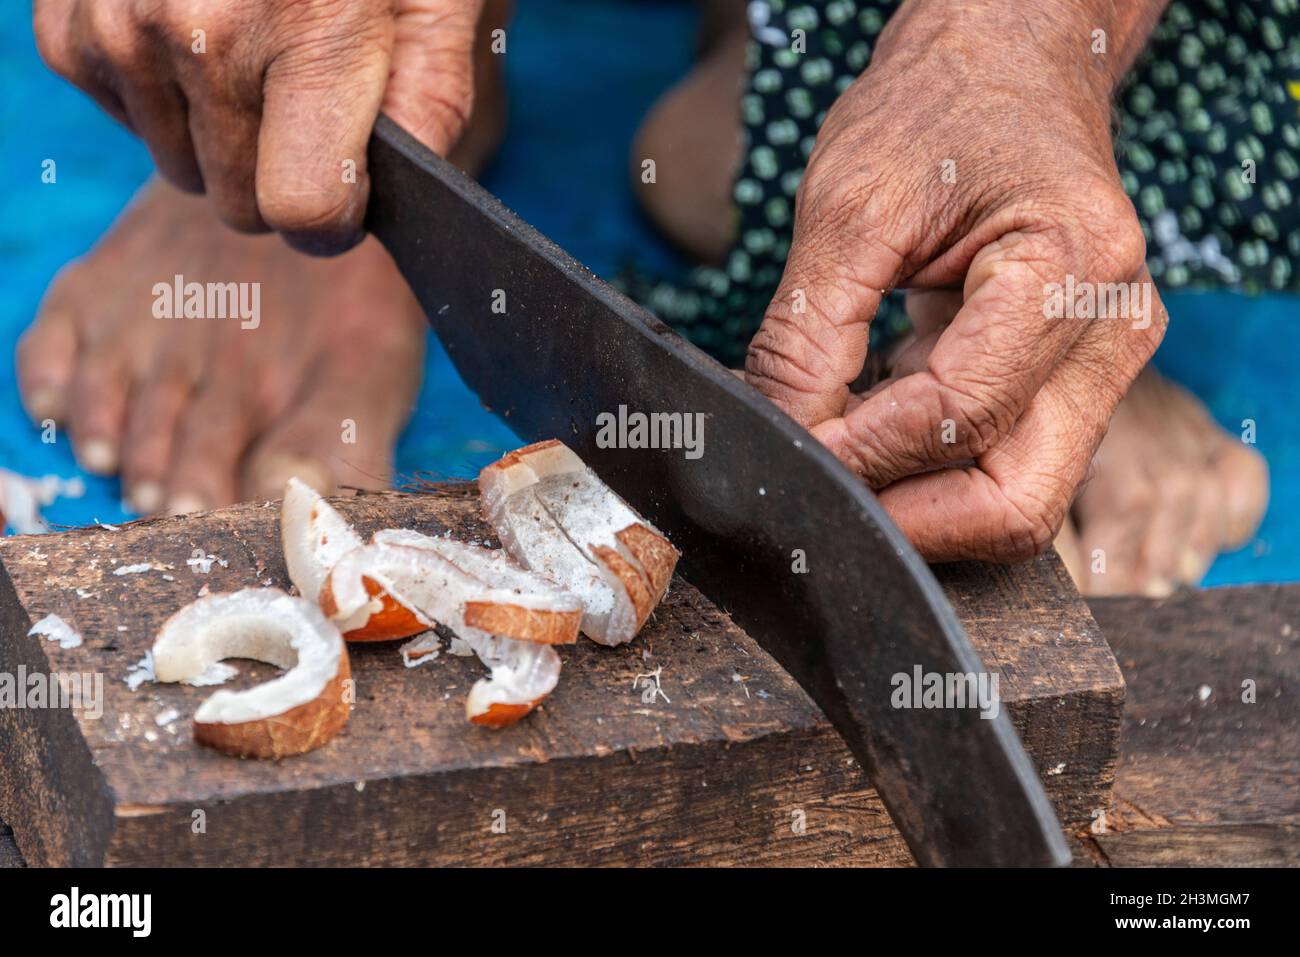 A cleaver is used for chopping a large pile of coconut husks into